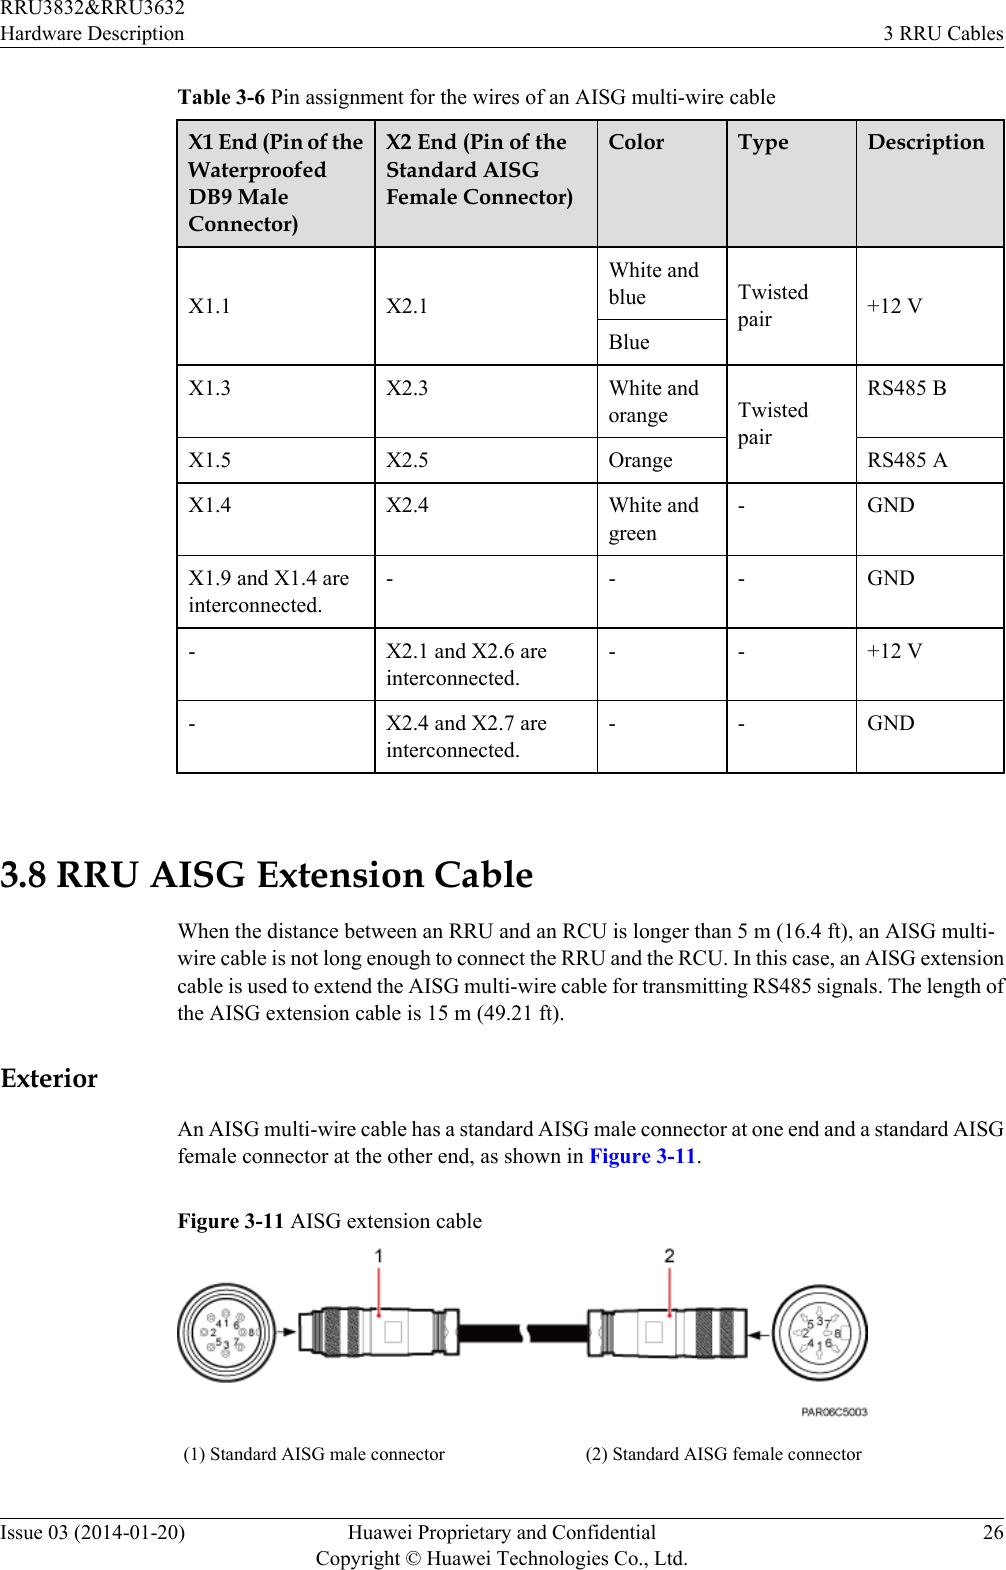 Table 3-6 Pin assignment for the wires of an AISG multi-wire cableX1 End (Pin of theWaterproofedDB9 MaleConnector)X2 End (Pin of theStandard AISGFemale Connector)Color Type DescriptionX1.1 X2.1White andblue Twistedpair +12 VBlueX1.3 X2.3 White andorange TwistedpairRS485 BX1.5 X2.5 Orange RS485 AX1.4 X2.4 White andgreen- GNDX1.9 and X1.4 areinterconnected.- - - GND- X2.1 and X2.6 areinterconnected.- - +12 V- X2.4 and X2.7 areinterconnected.- - GND 3.8 RRU AISG Extension CableWhen the distance between an RRU and an RCU is longer than 5 m (16.4 ft), an AISG multi-wire cable is not long enough to connect the RRU and the RCU. In this case, an AISG extensioncable is used to extend the AISG multi-wire cable for transmitting RS485 signals. The length ofthe AISG extension cable is 15 m (49.21 ft).ExteriorAn AISG multi-wire cable has a standard AISG male connector at one end and a standard AISGfemale connector at the other end, as shown in Figure 3-11.Figure 3-11 AISG extension cable(1) Standard AISG male connector (2) Standard AISG female connectorRRU3832&amp;RRU3632Hardware Description 3 RRU CablesIssue 03 (2014-01-20) Huawei Proprietary and ConfidentialCopyright © Huawei Technologies Co., Ltd.26